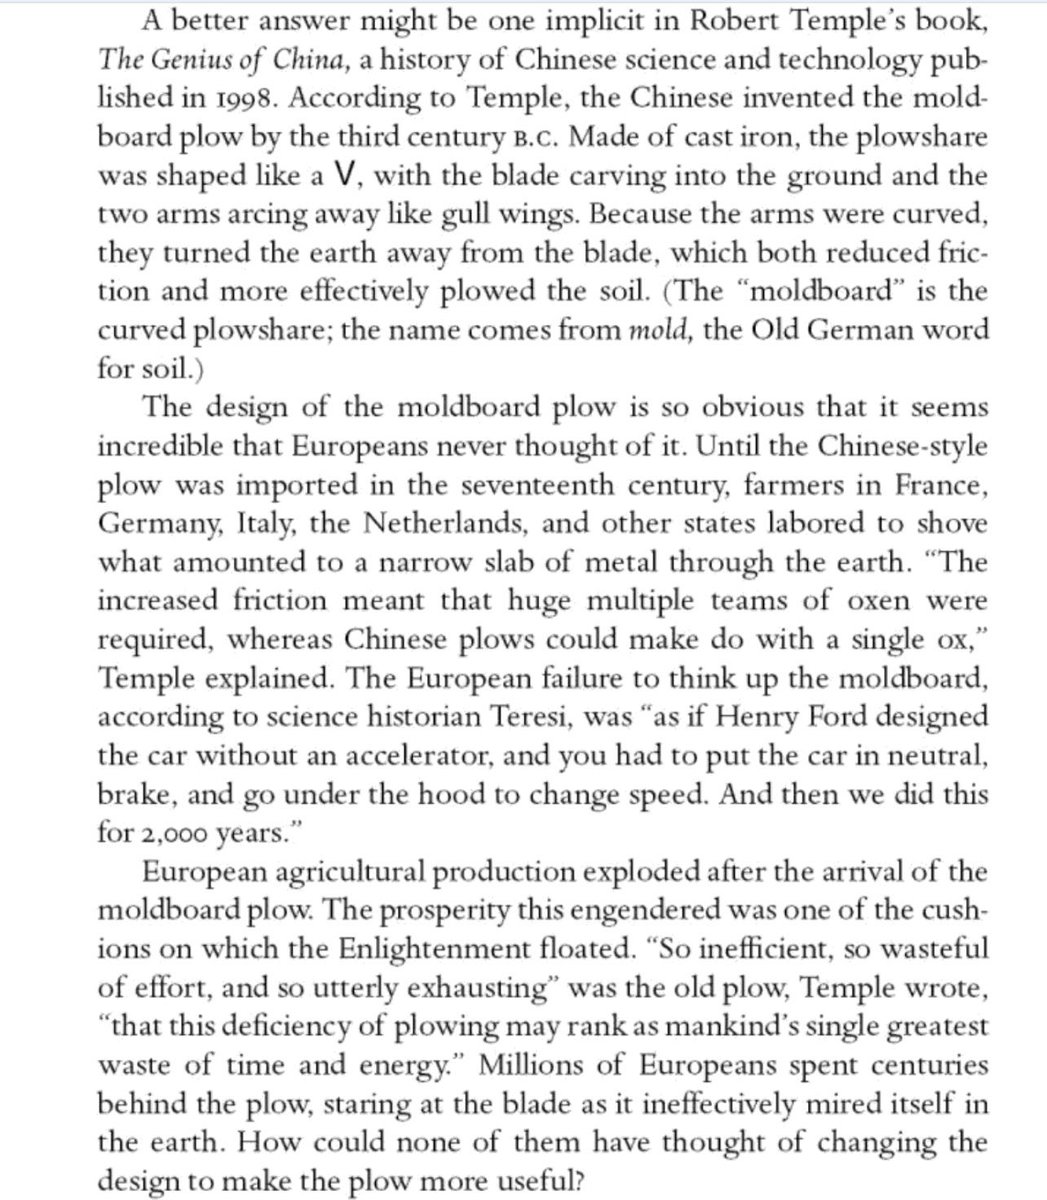 Wheeled luggage is great, but some missed simple technologies caused untold & unnecessary waste. This section, from Mann's 1491, suggests the moldboard plow is the biggest missed opportunity, a simple idea which China had for nearly 2k years before Europe! 2/4